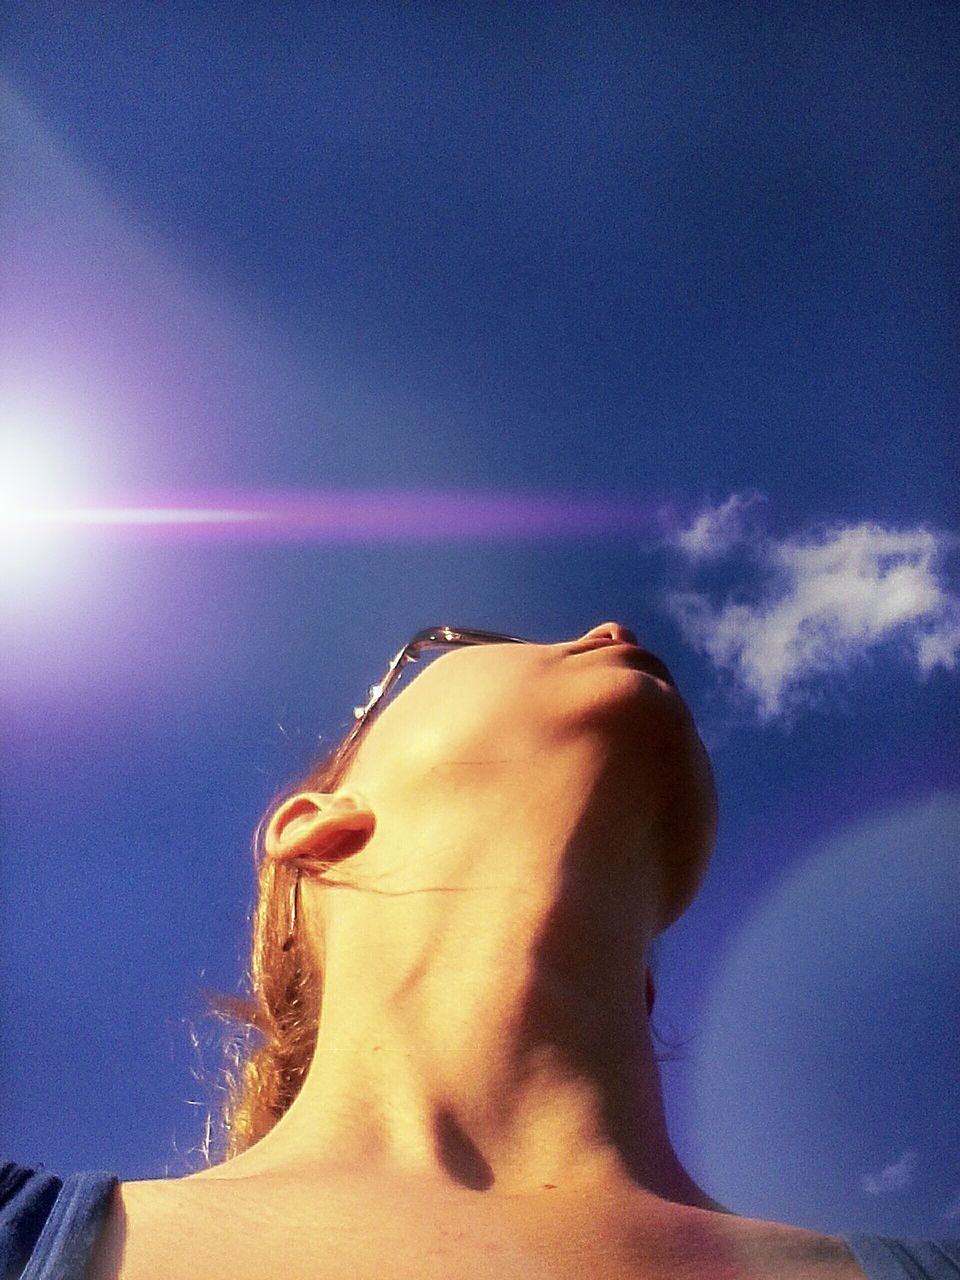 MIDSECTION OF WOMAN AGAINST SKY